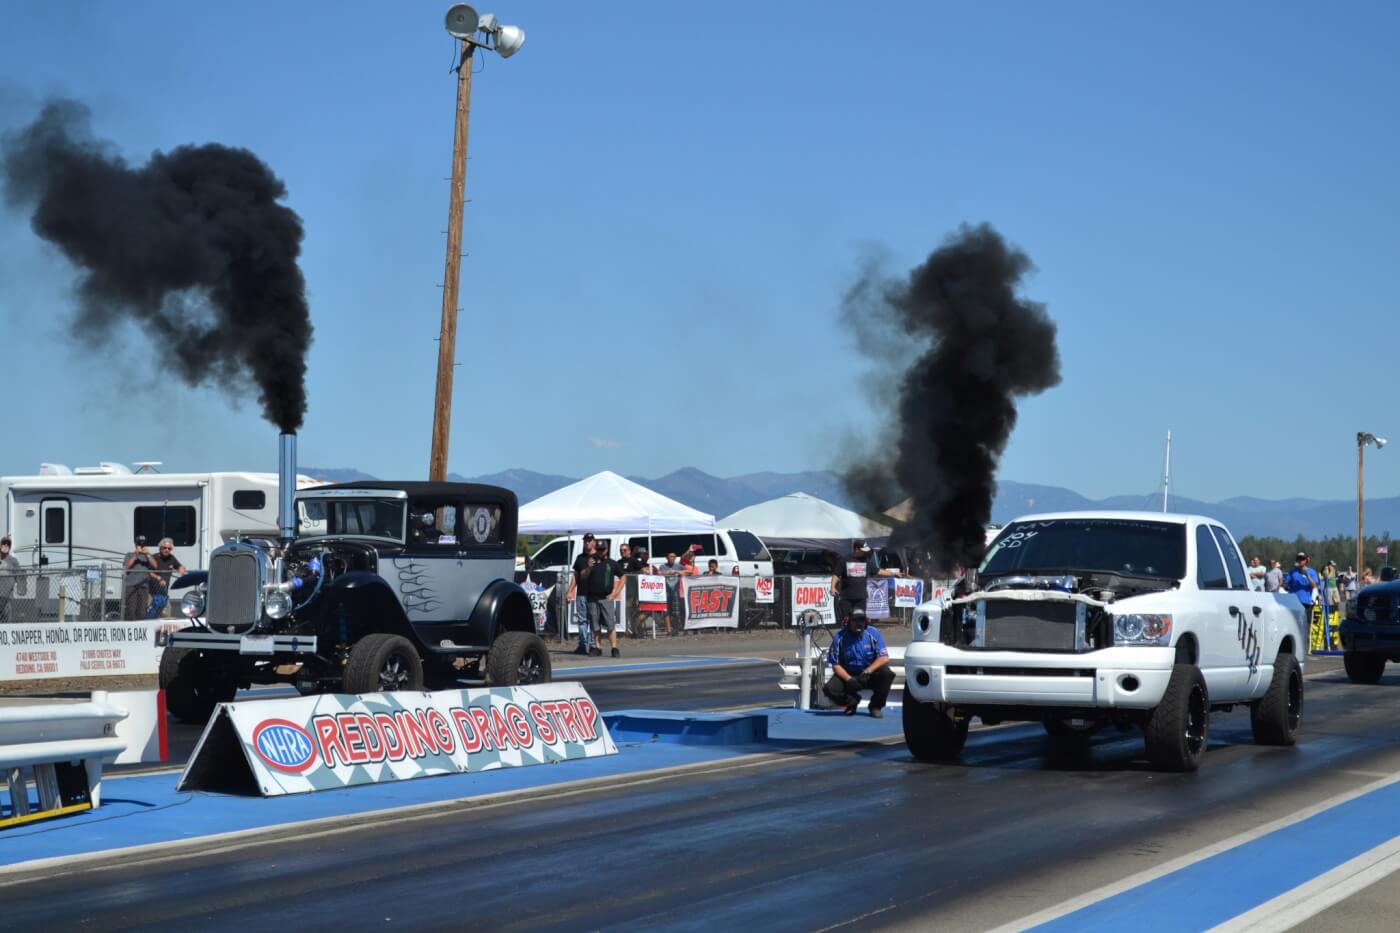 As the competition went on, we saw a number of interesting pairings, like this diesel street rod (known as “The Fodge") that lined up against a common-rail drag truck.